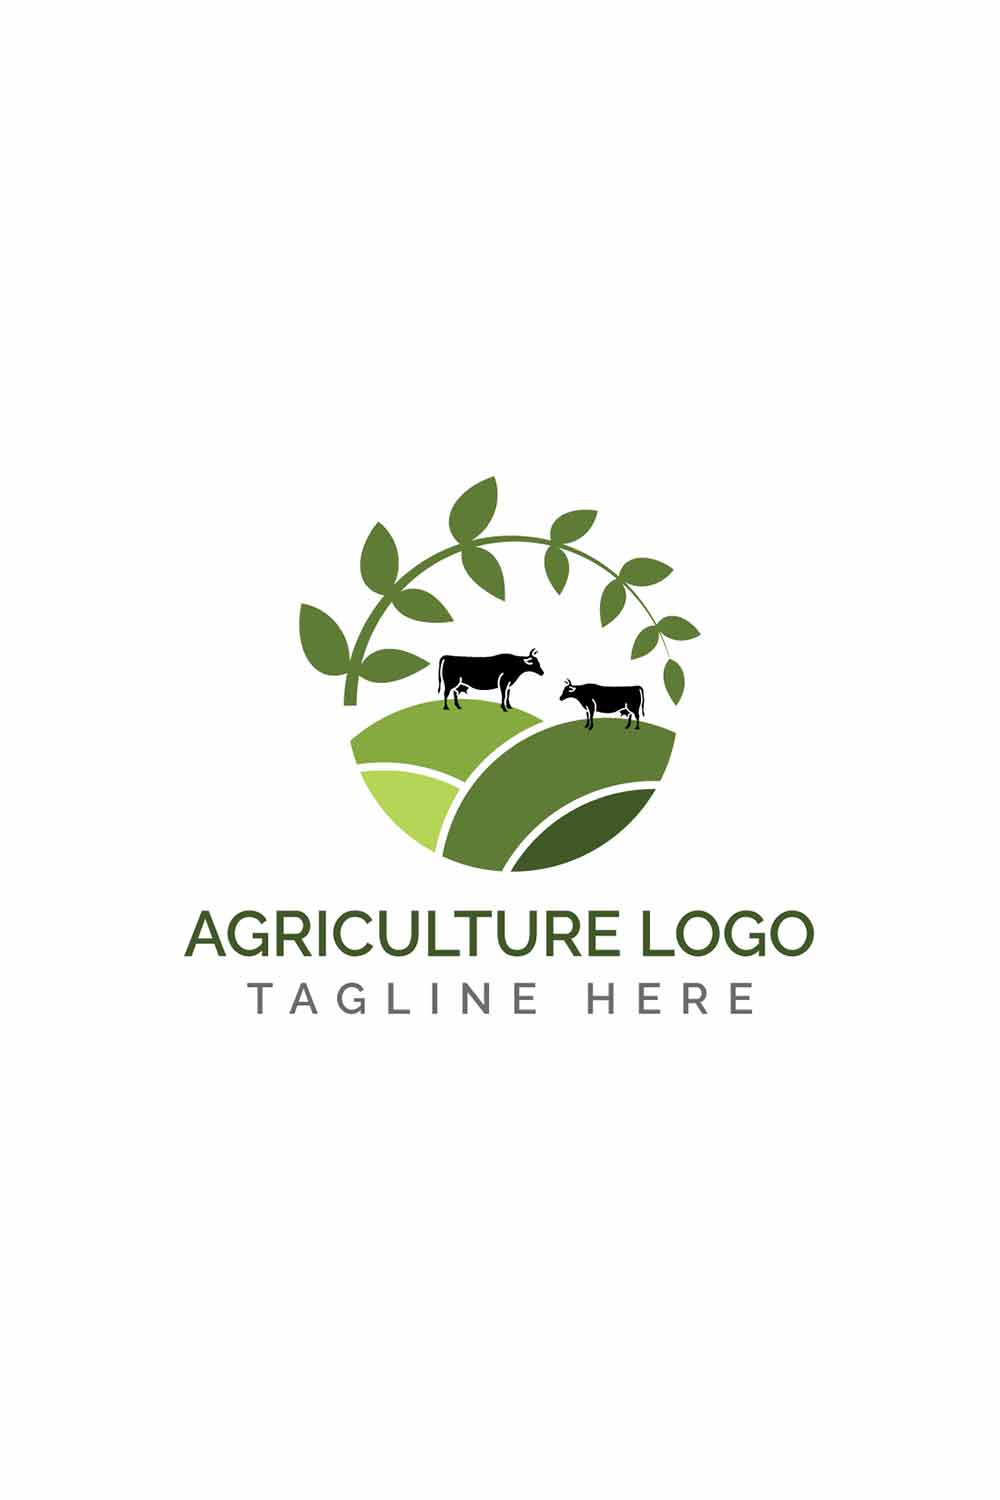 The logo for agriculture company.